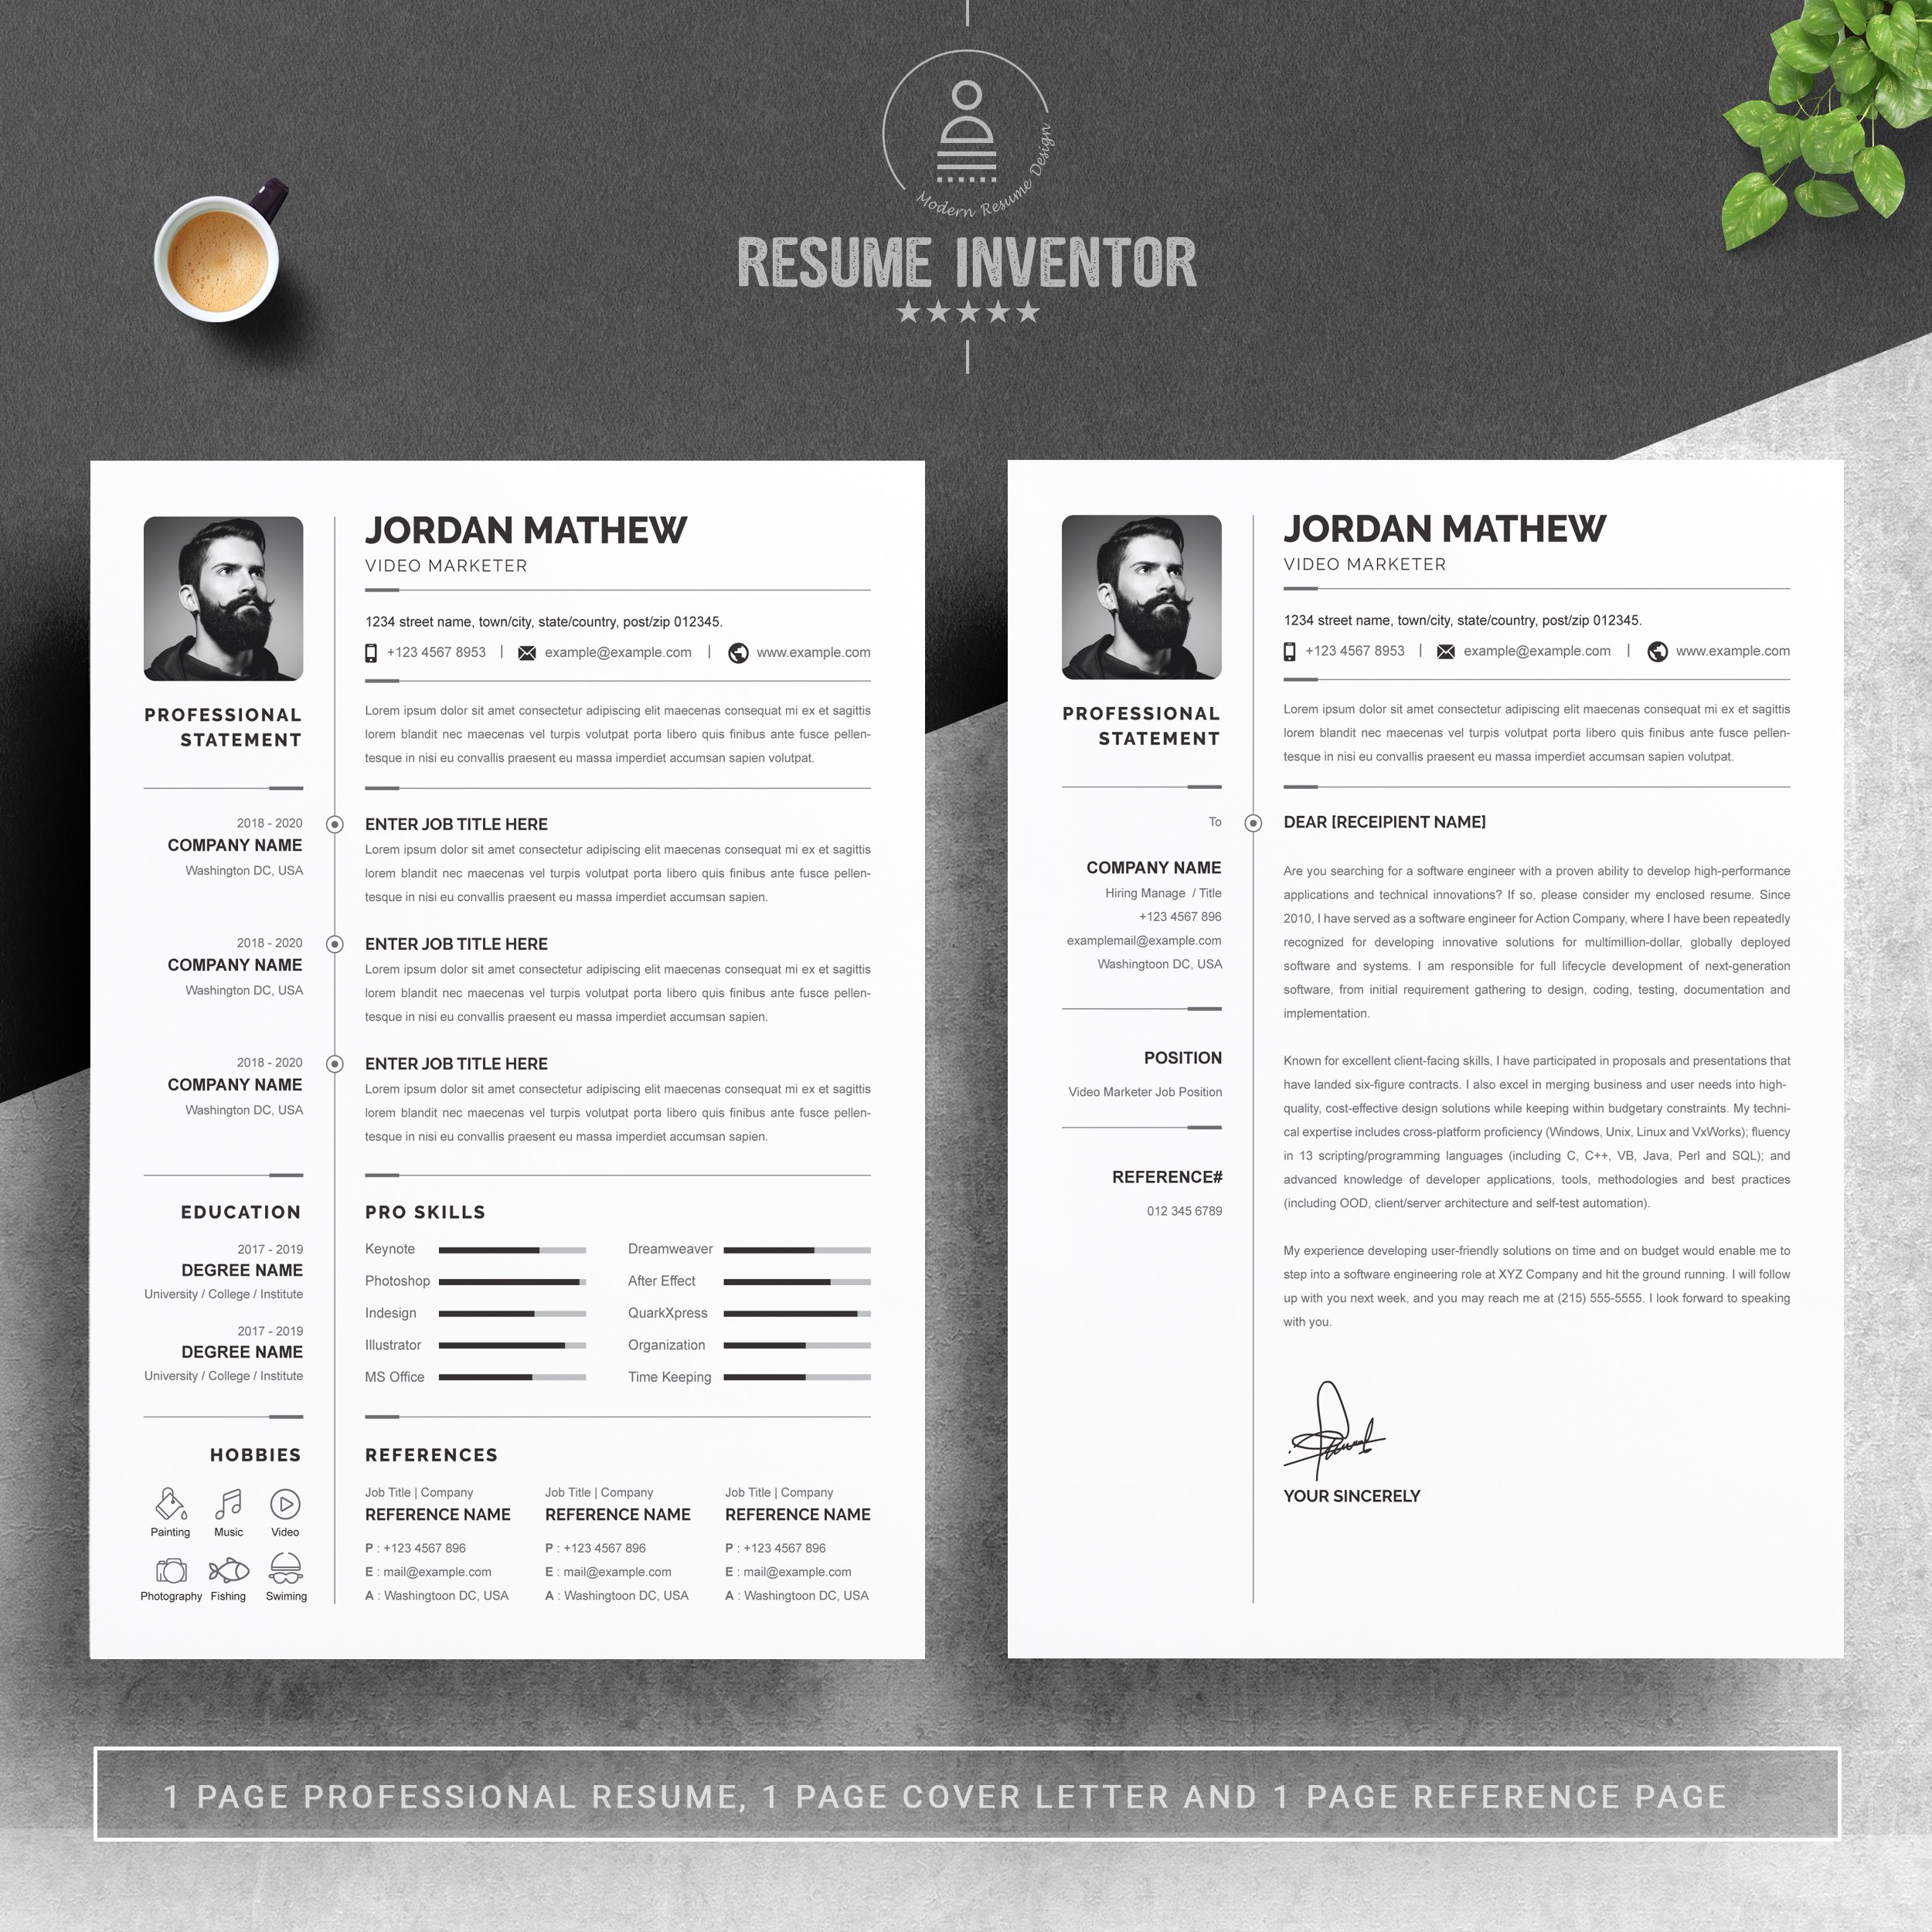 Professional Resume Microsoft Word preview image.